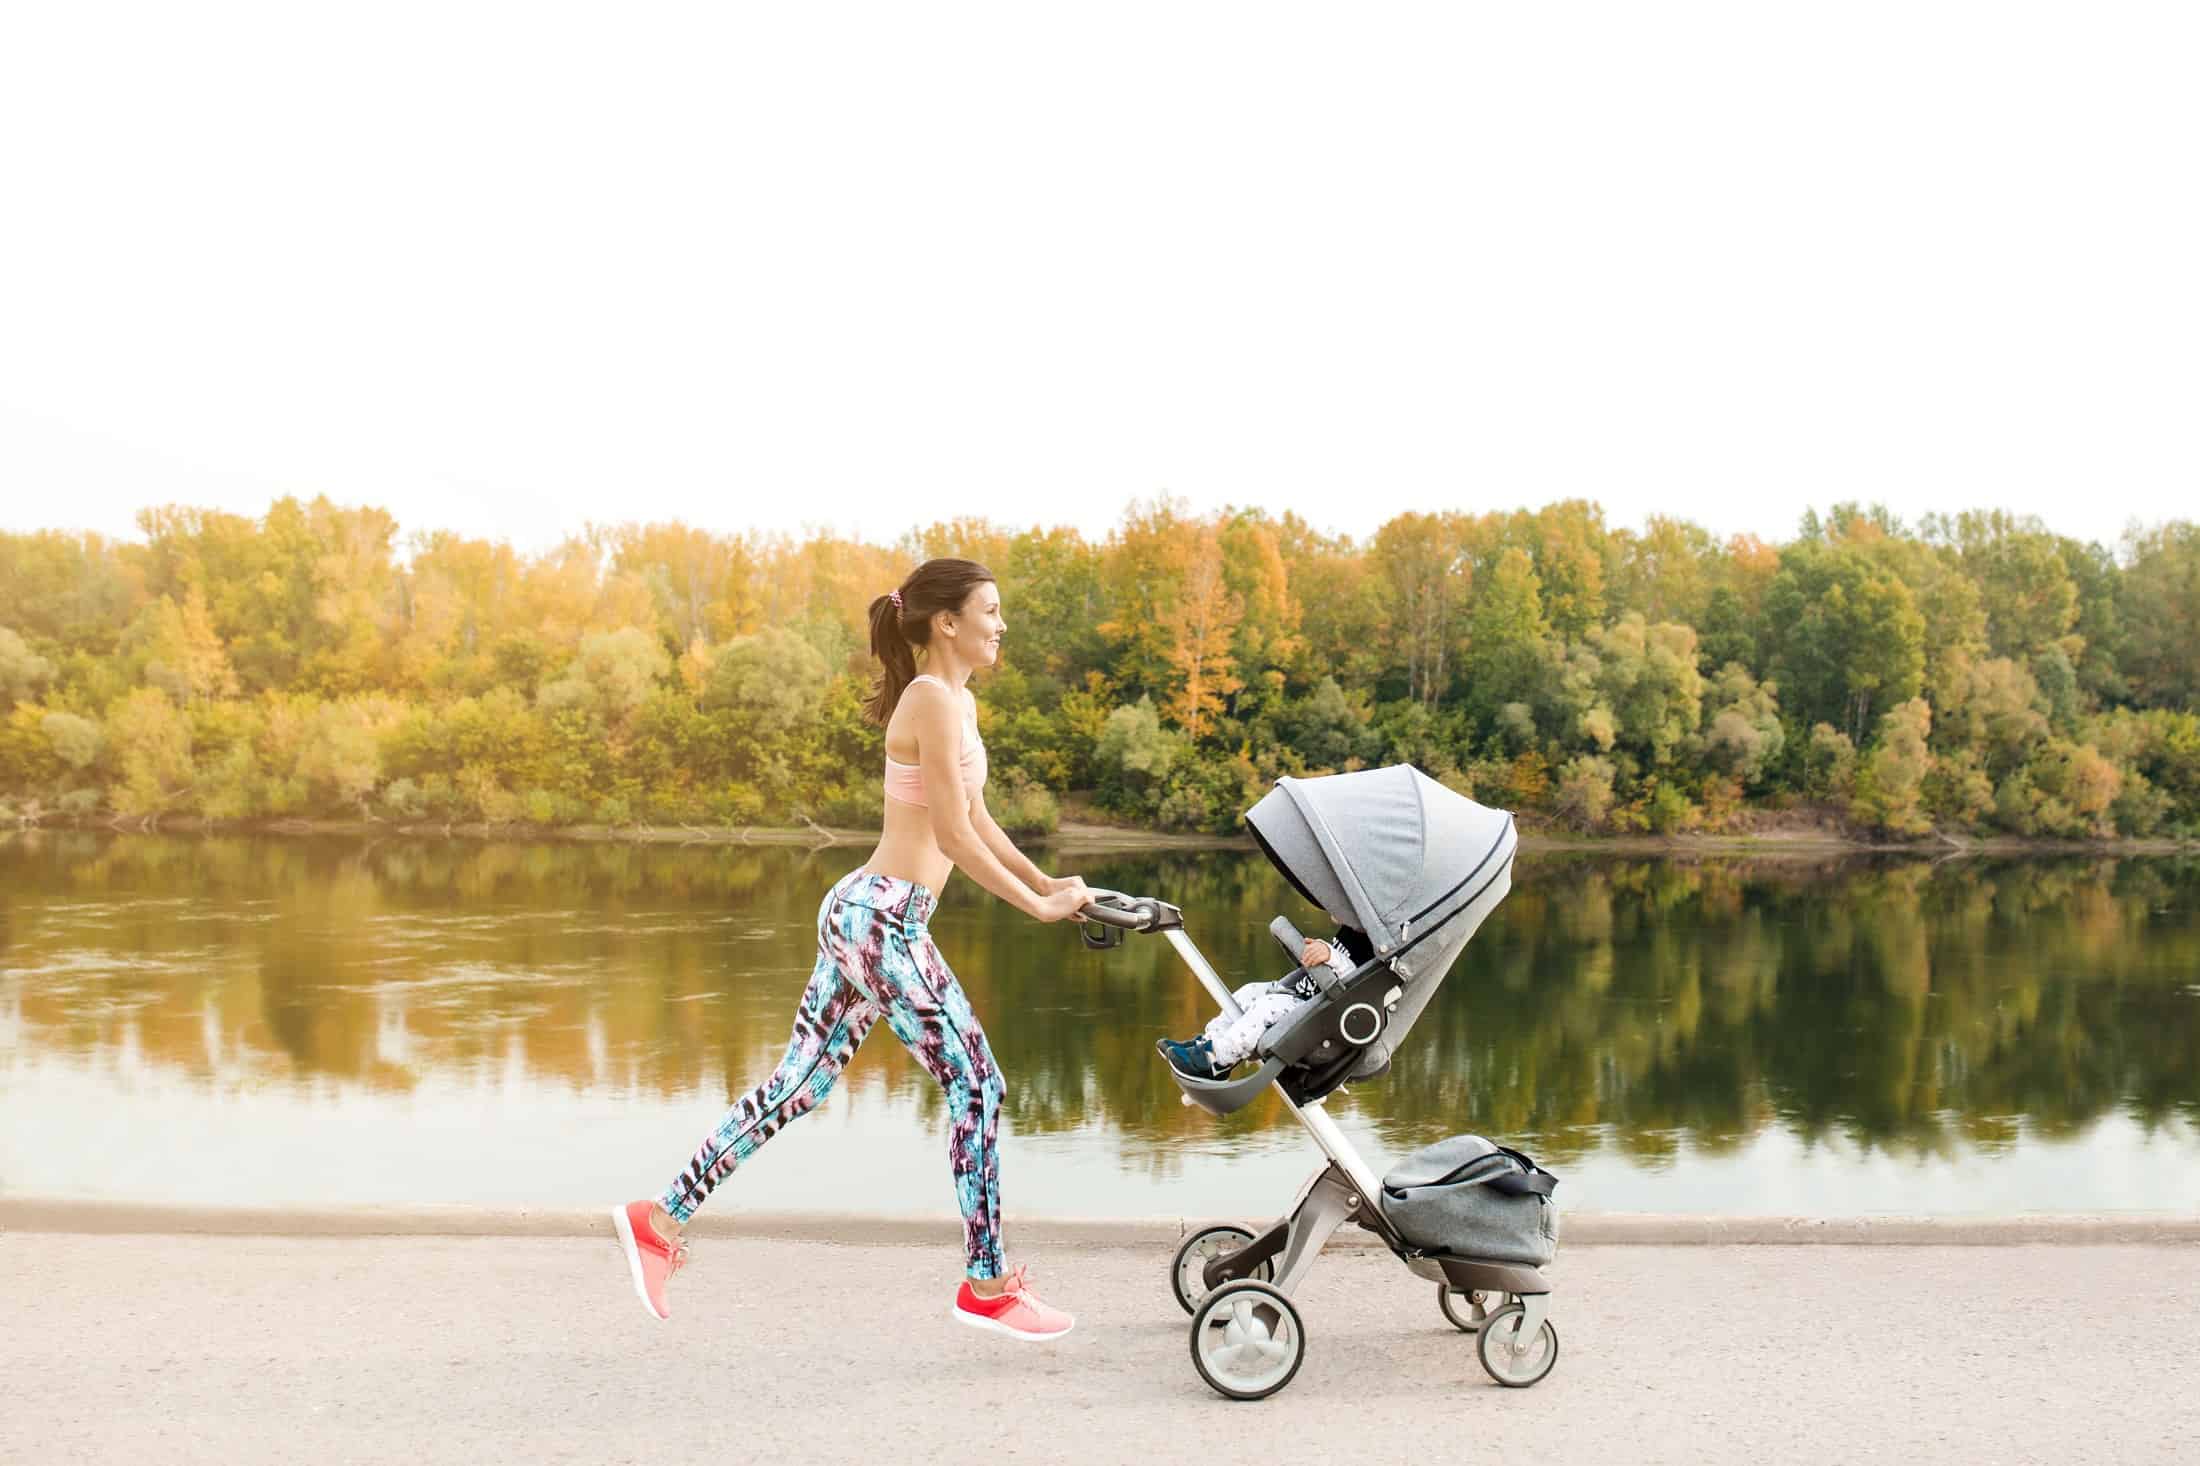 Buggy gym – do you know all about fitness with a stroller?